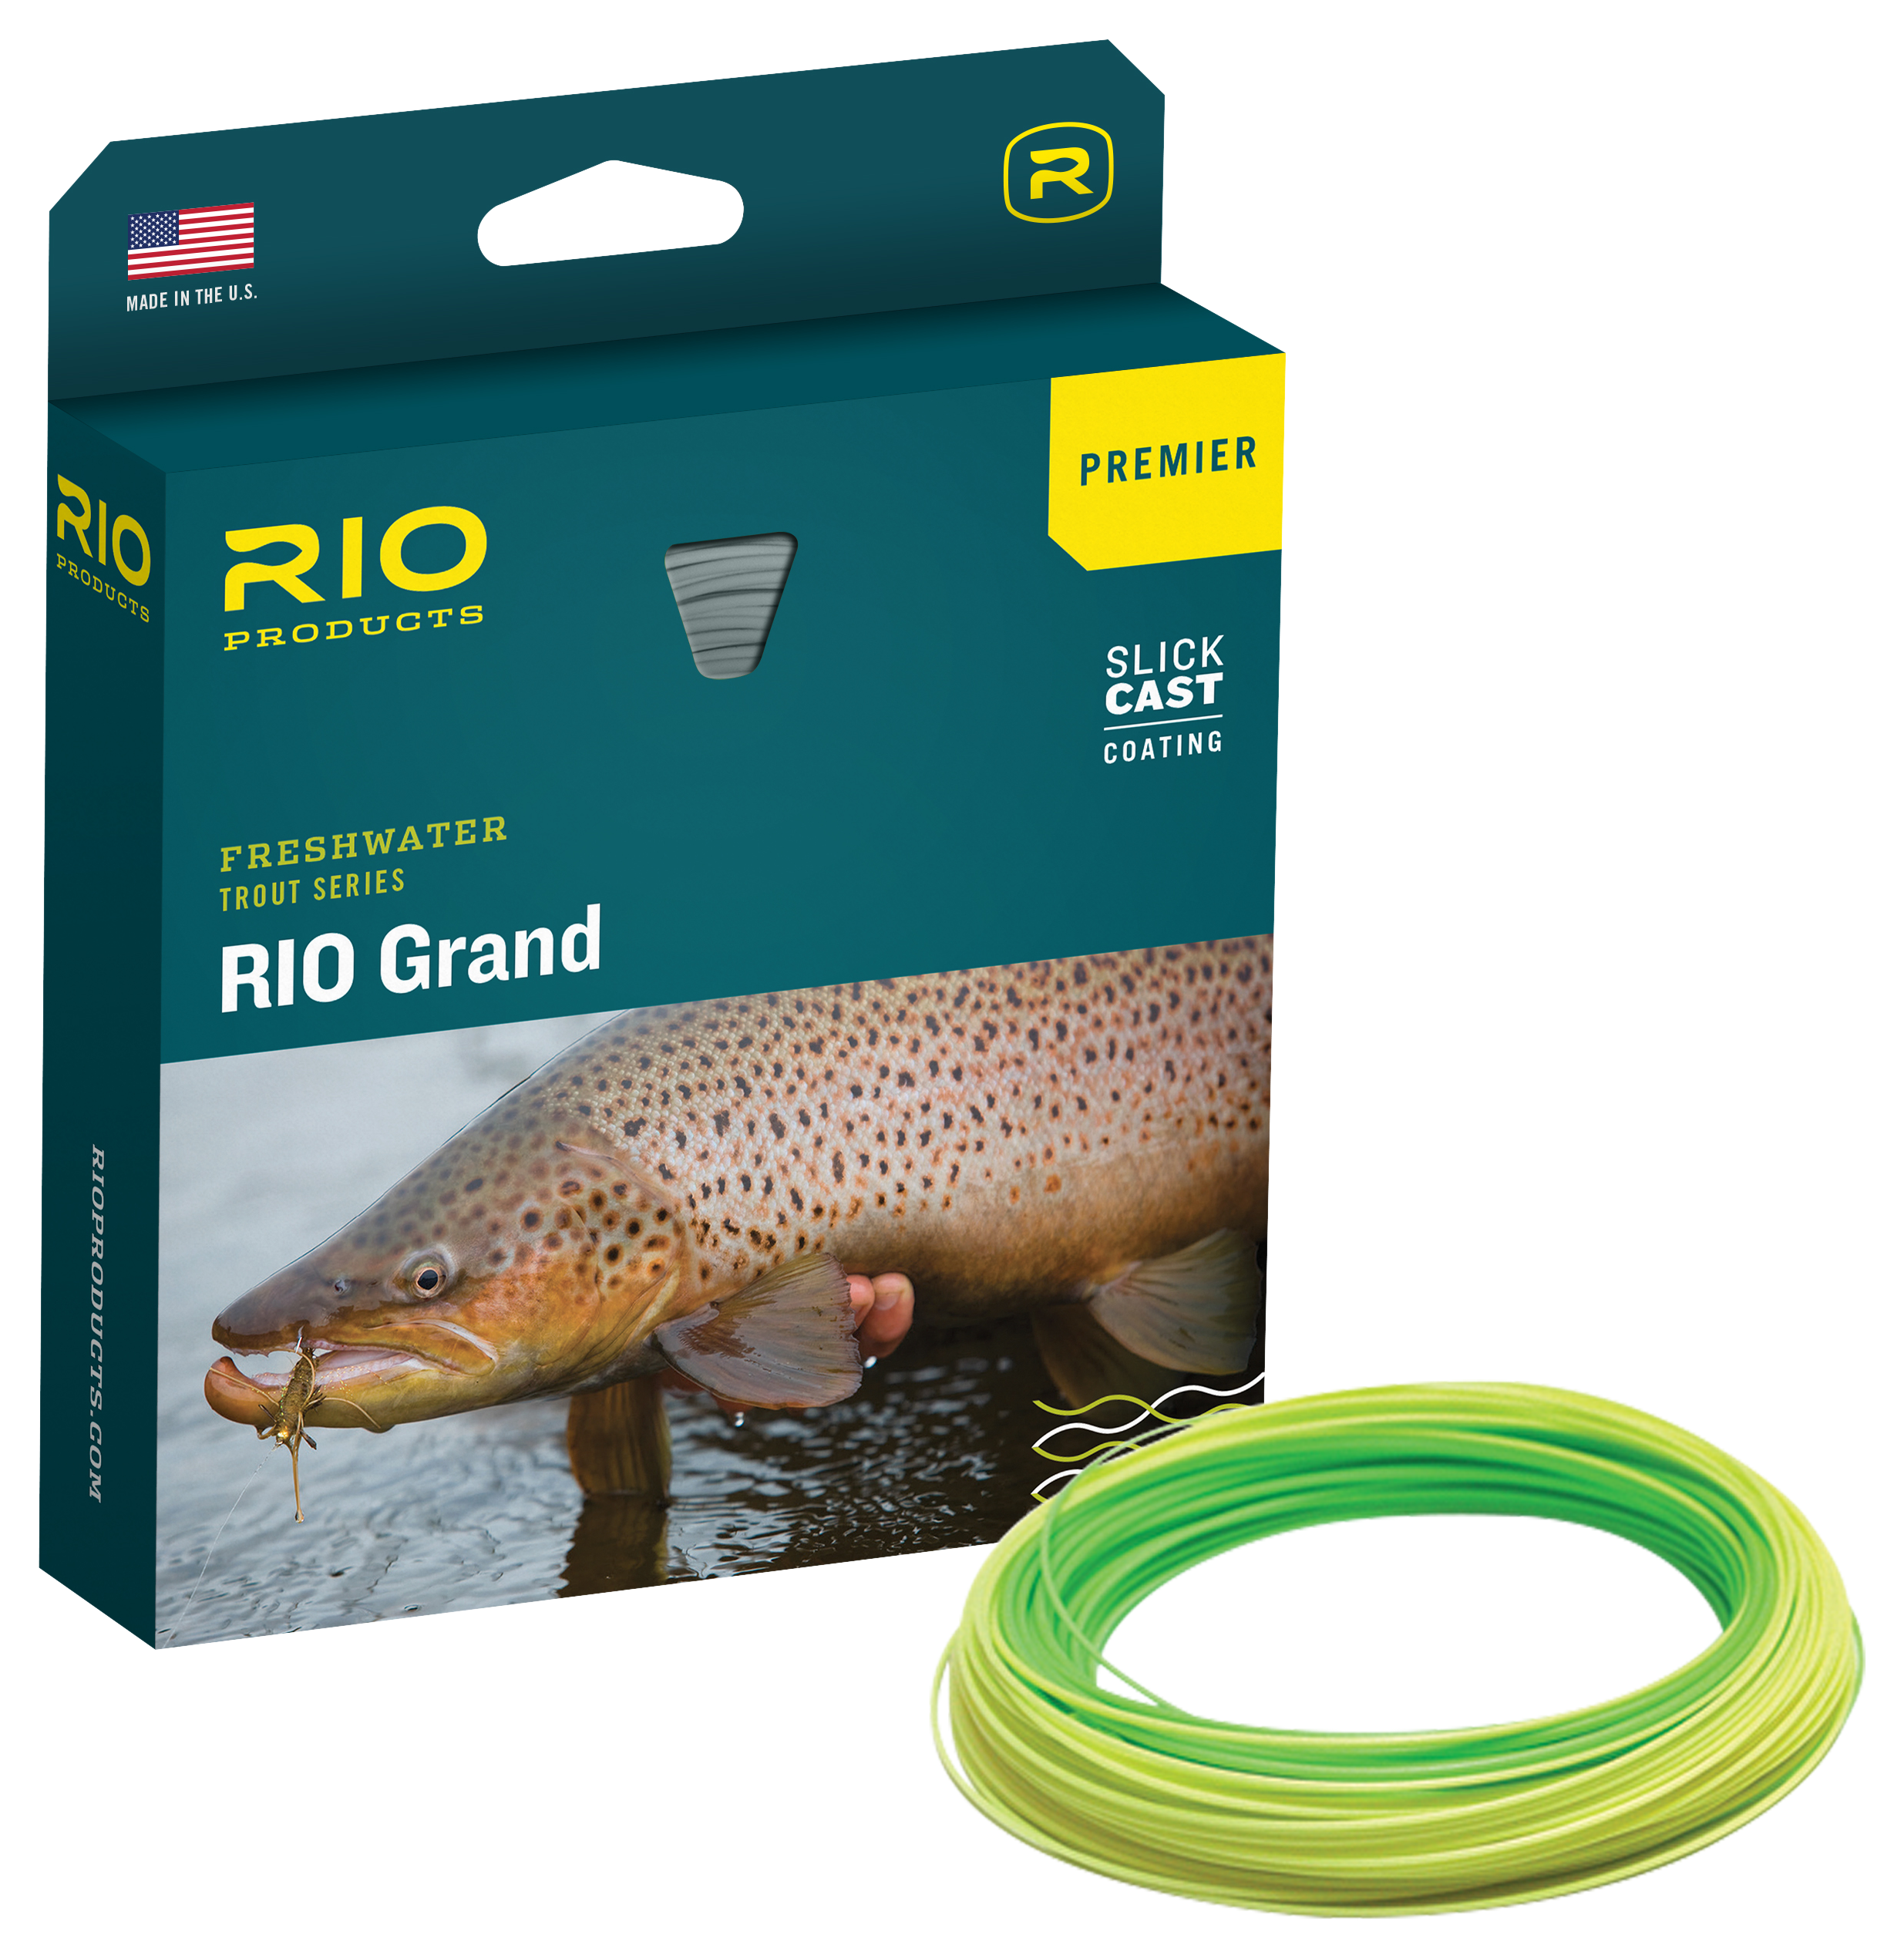 RIO Premier Grand Fly Line - 80' - 3 Line Wt. - Pale Green/Light Yellow